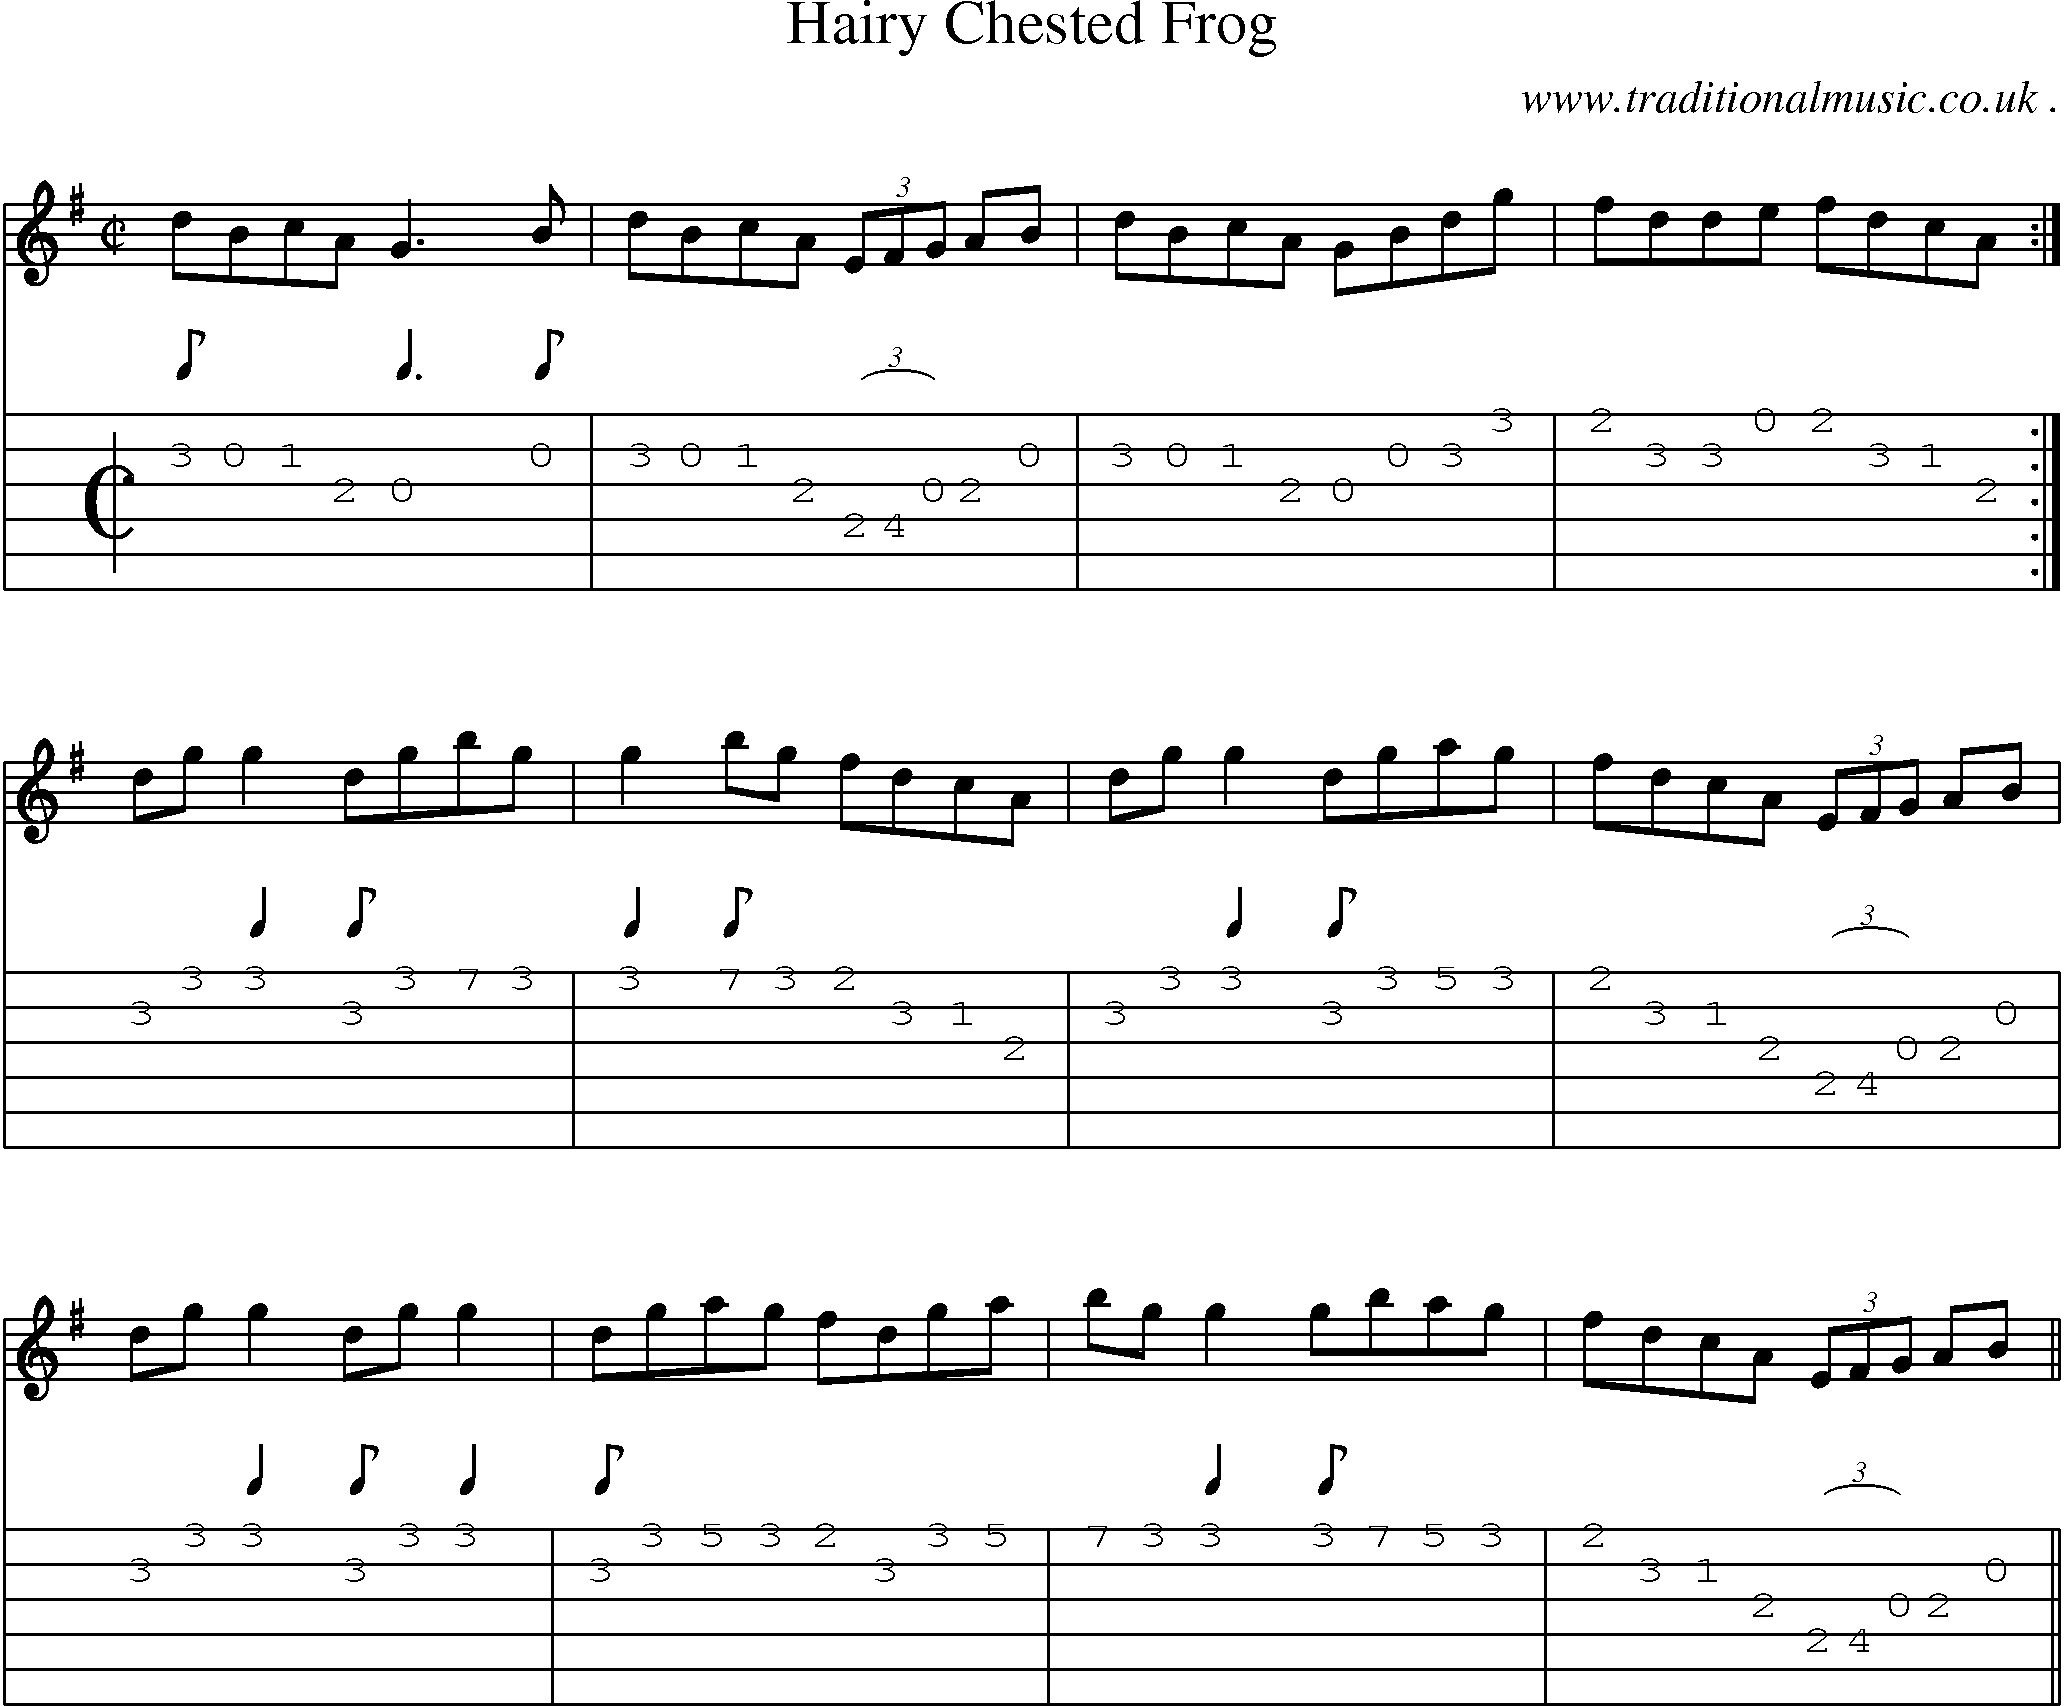 Sheet-Music and Guitar Tabs for Hairy Chested Frog